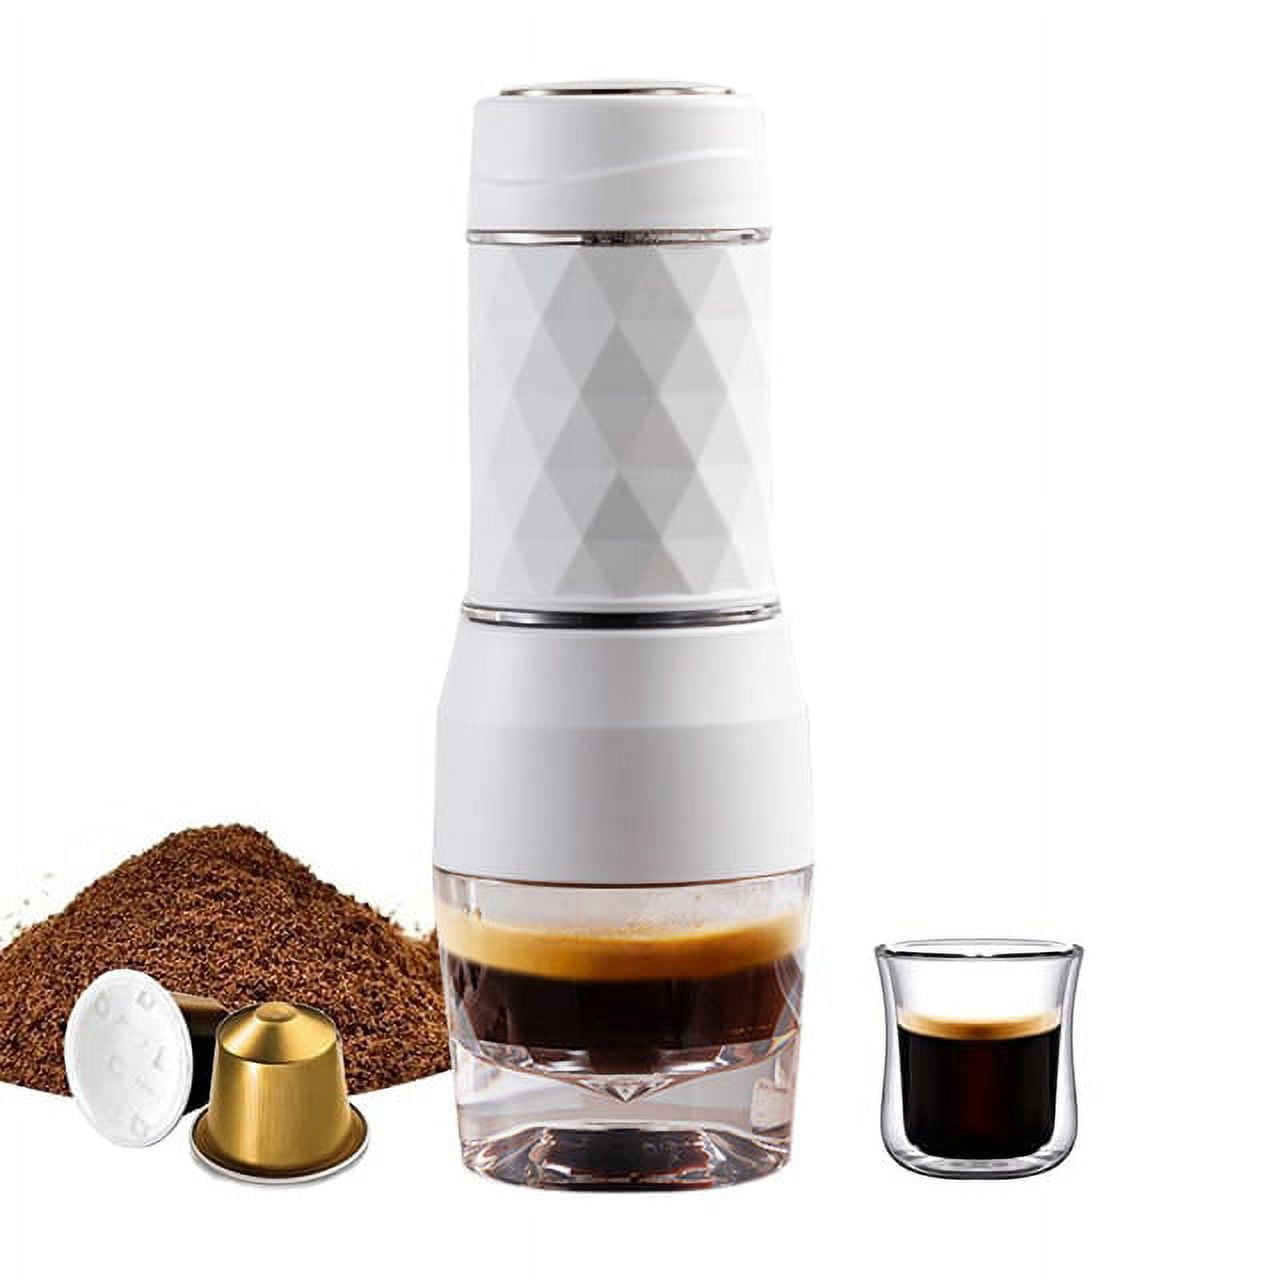 Portable Electric Espresso Machine, 1200mAh Coffee Machine Travel, Maximize  the Flavor and Taste Of the Coffee, Full Extraction for K Capsules, Ground